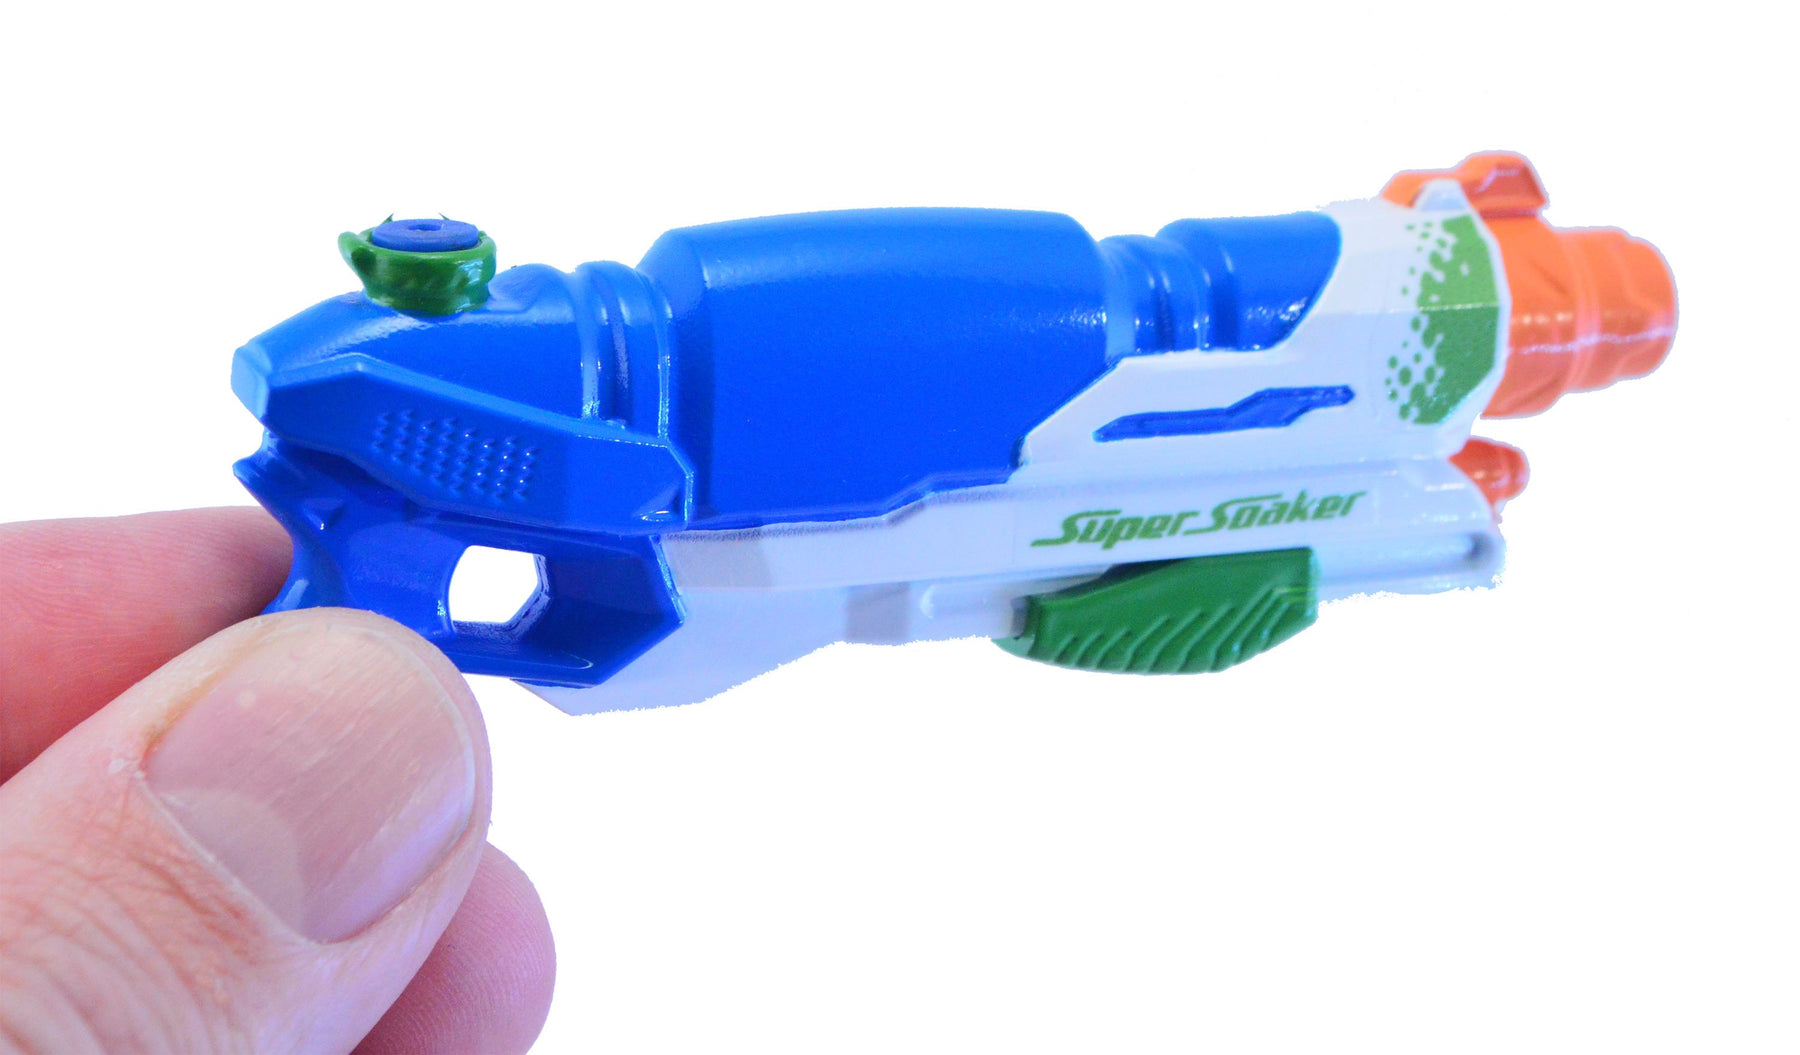 World's Smallest Super Soaker Set of 3 - Zlc Collectibles